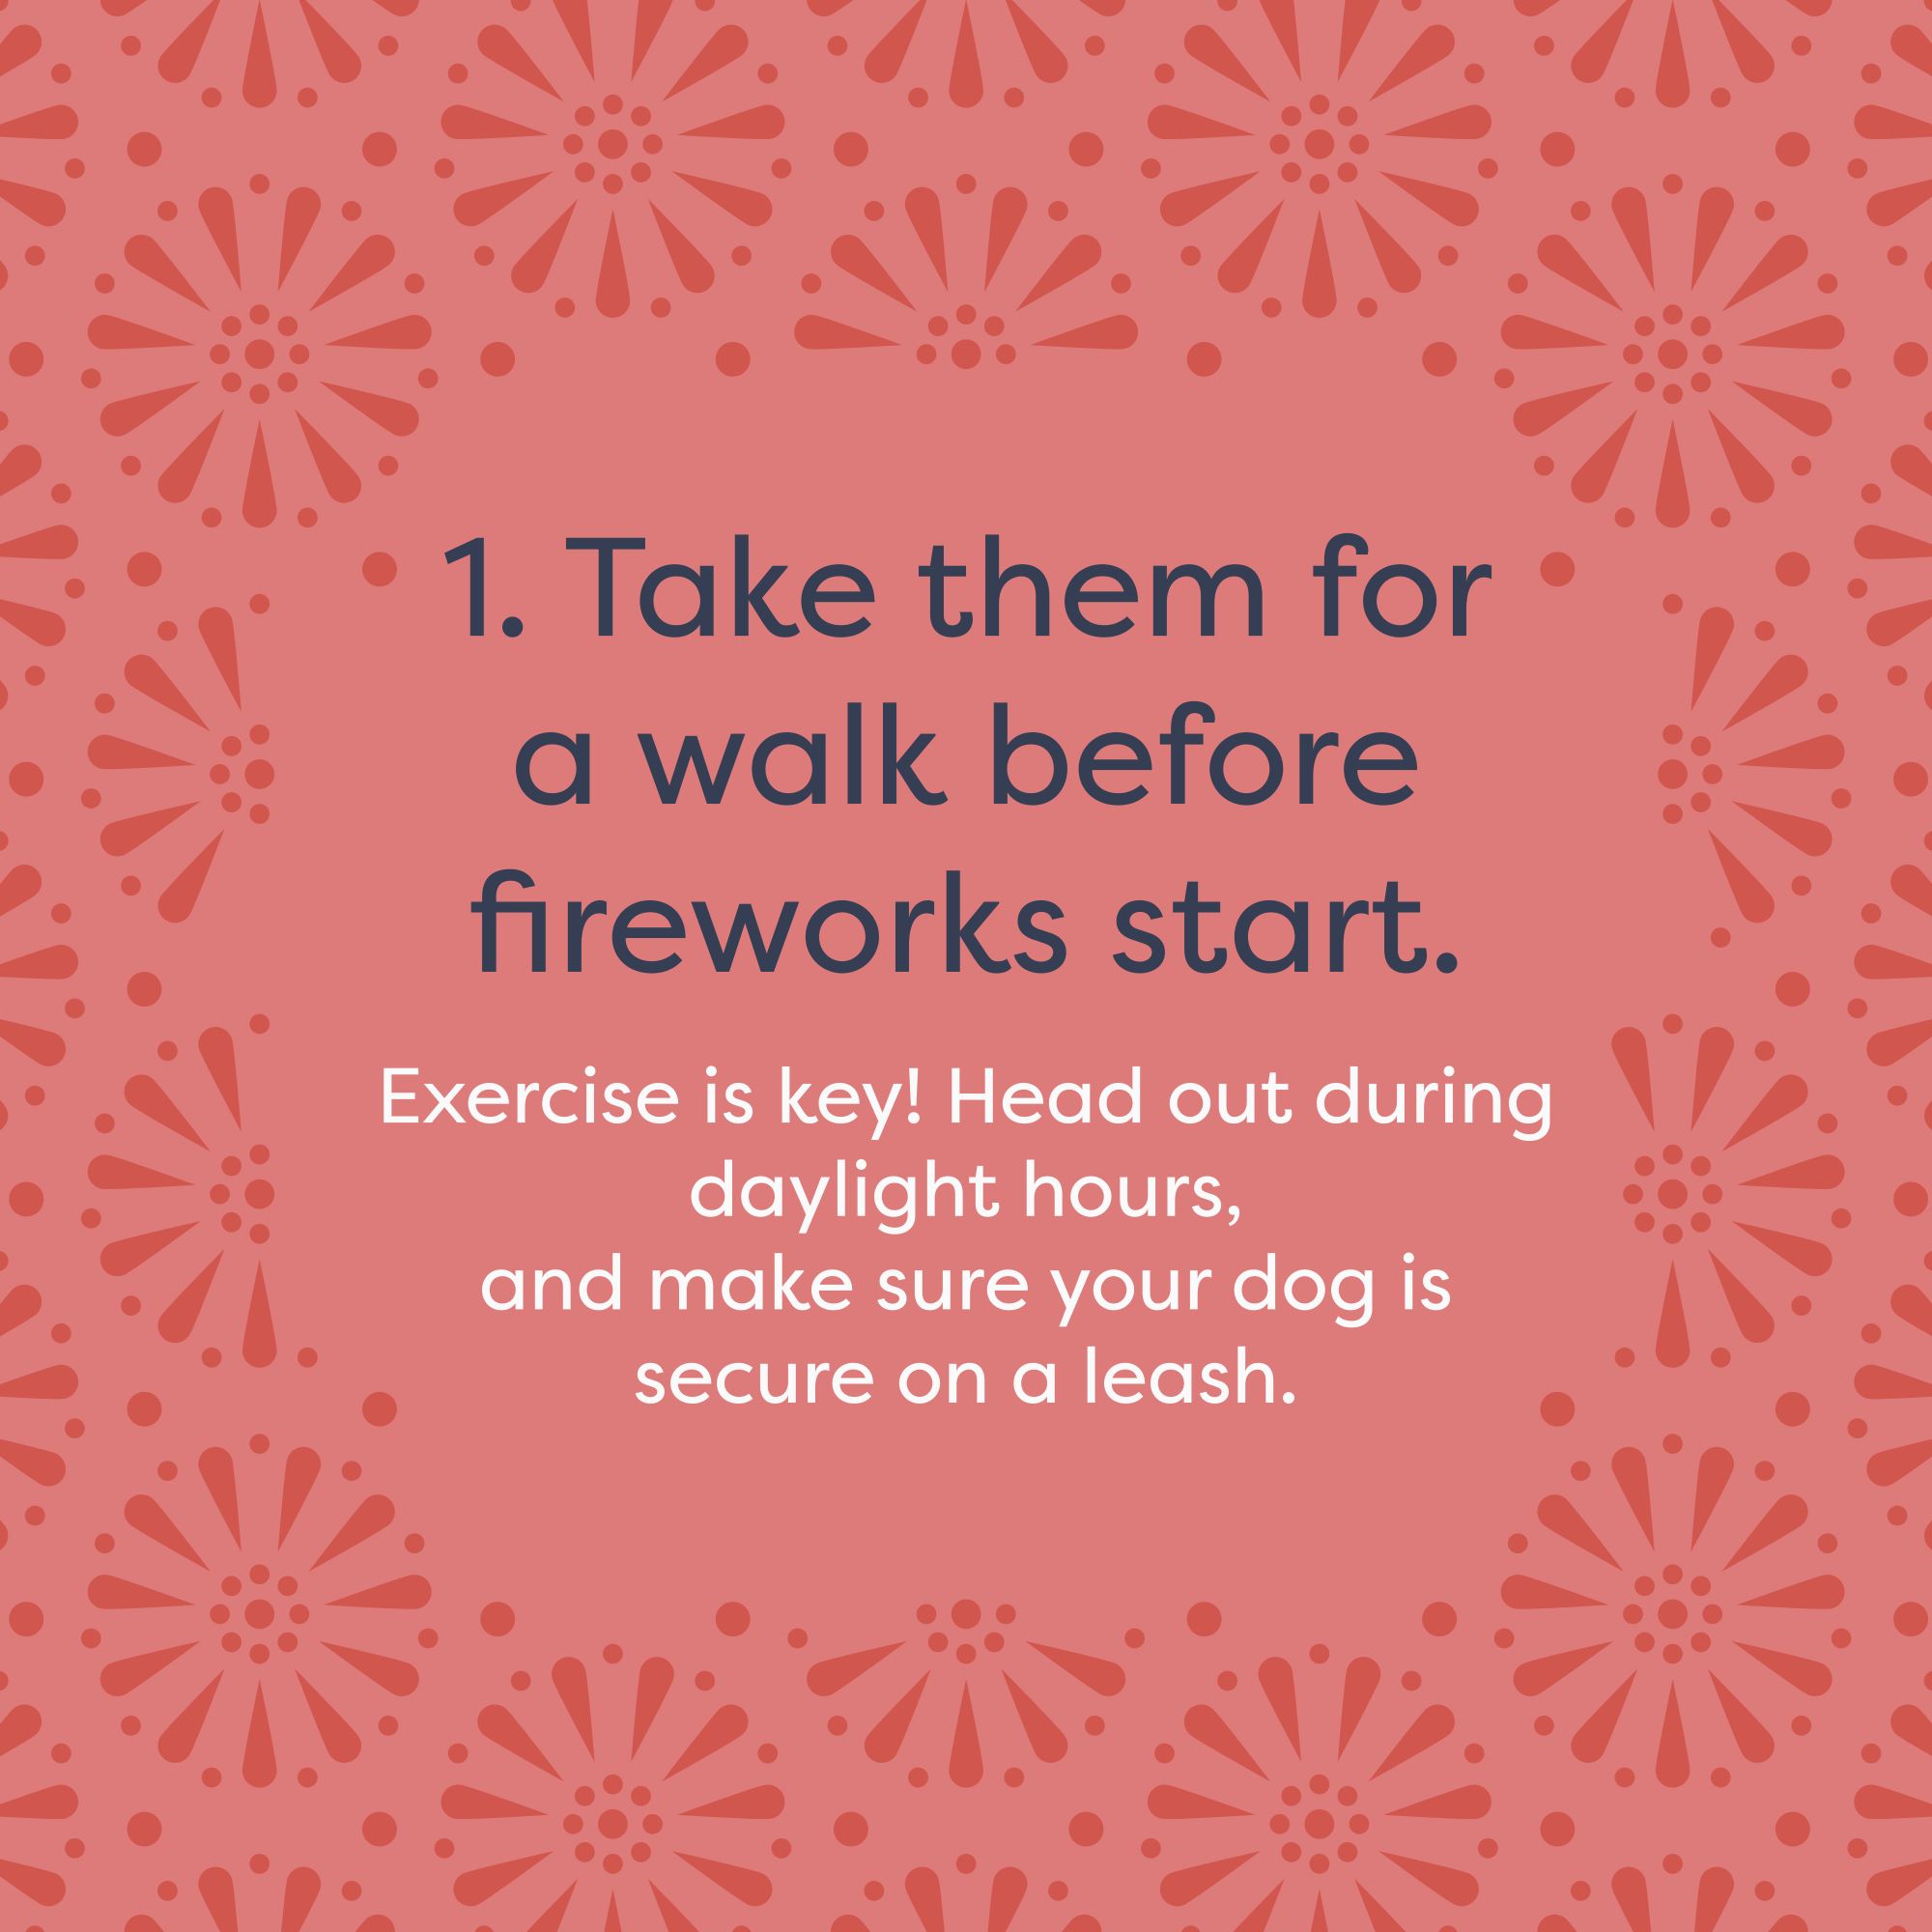 dog firework anxiety tips - take them for a walk before fireworks start